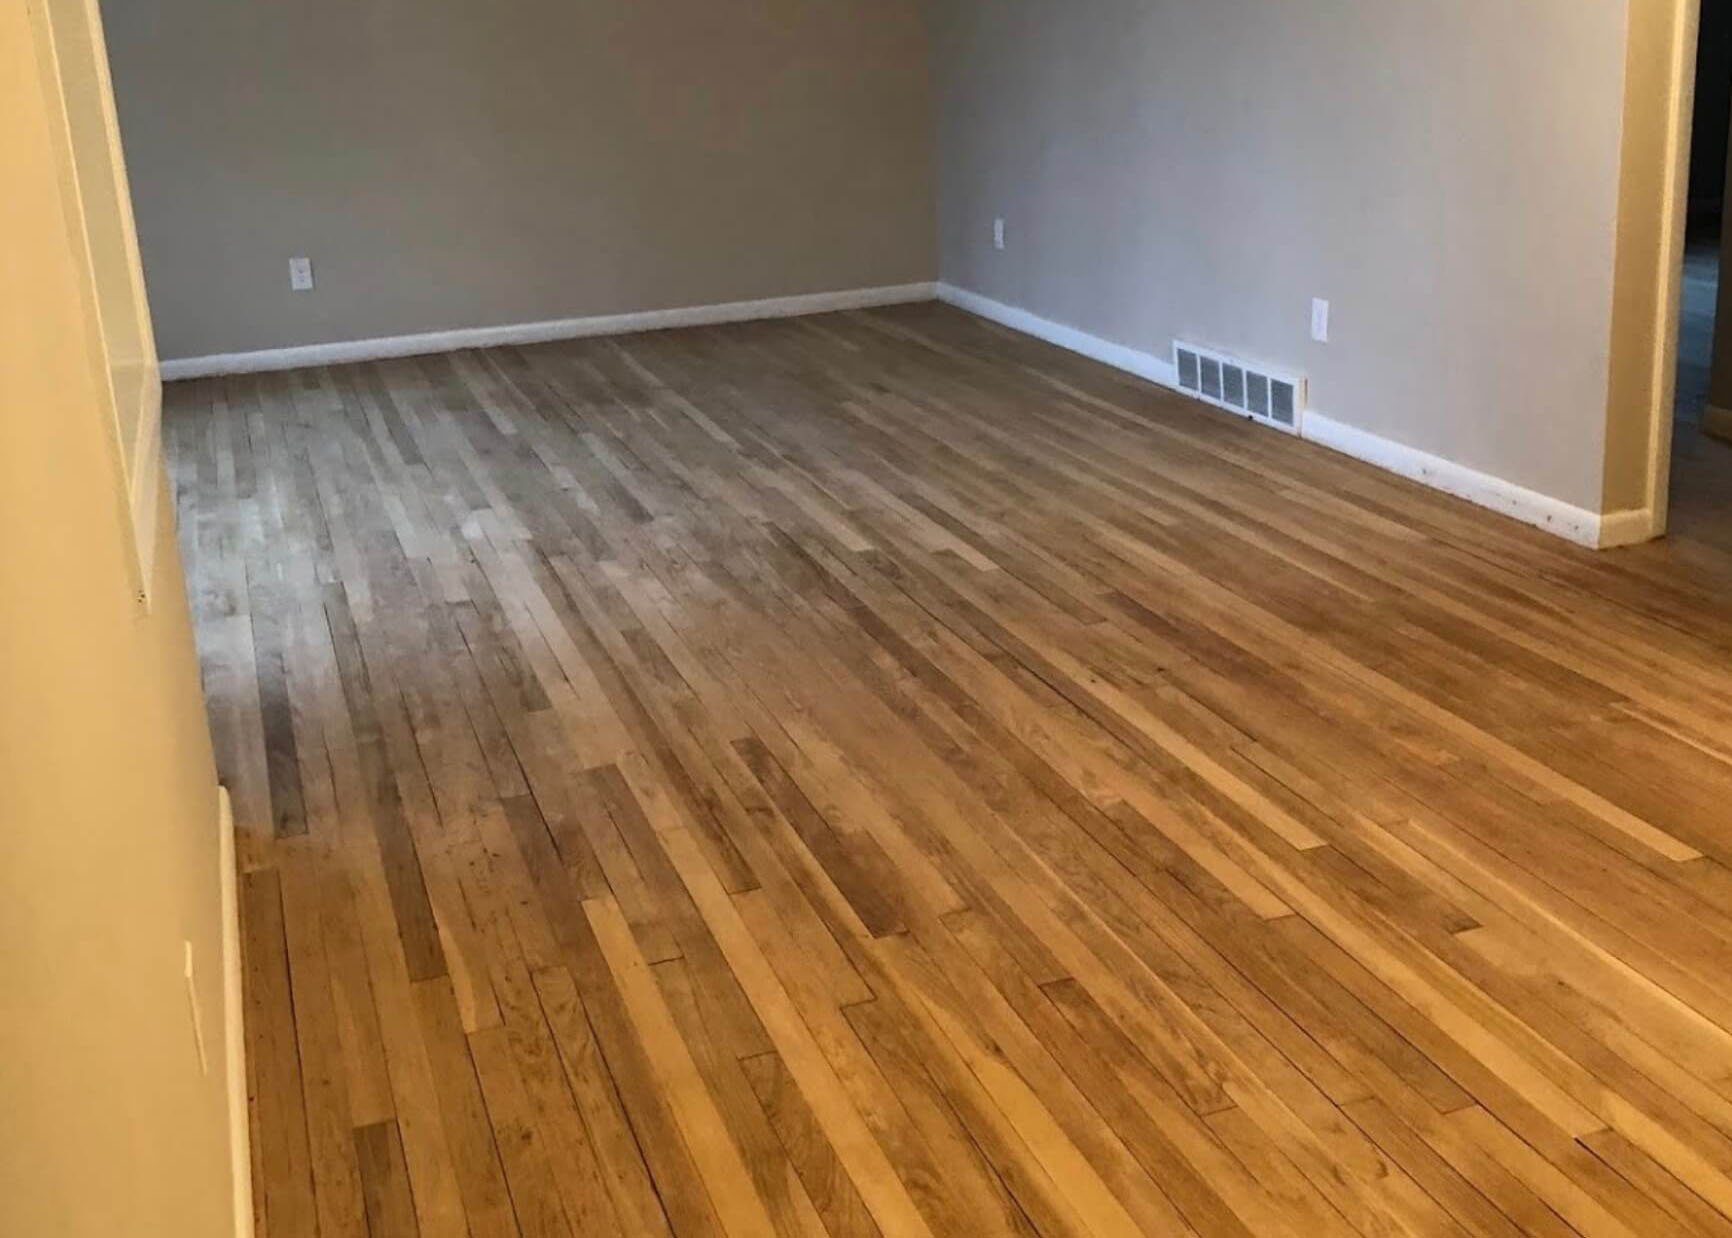 a floor in need of a new stain color